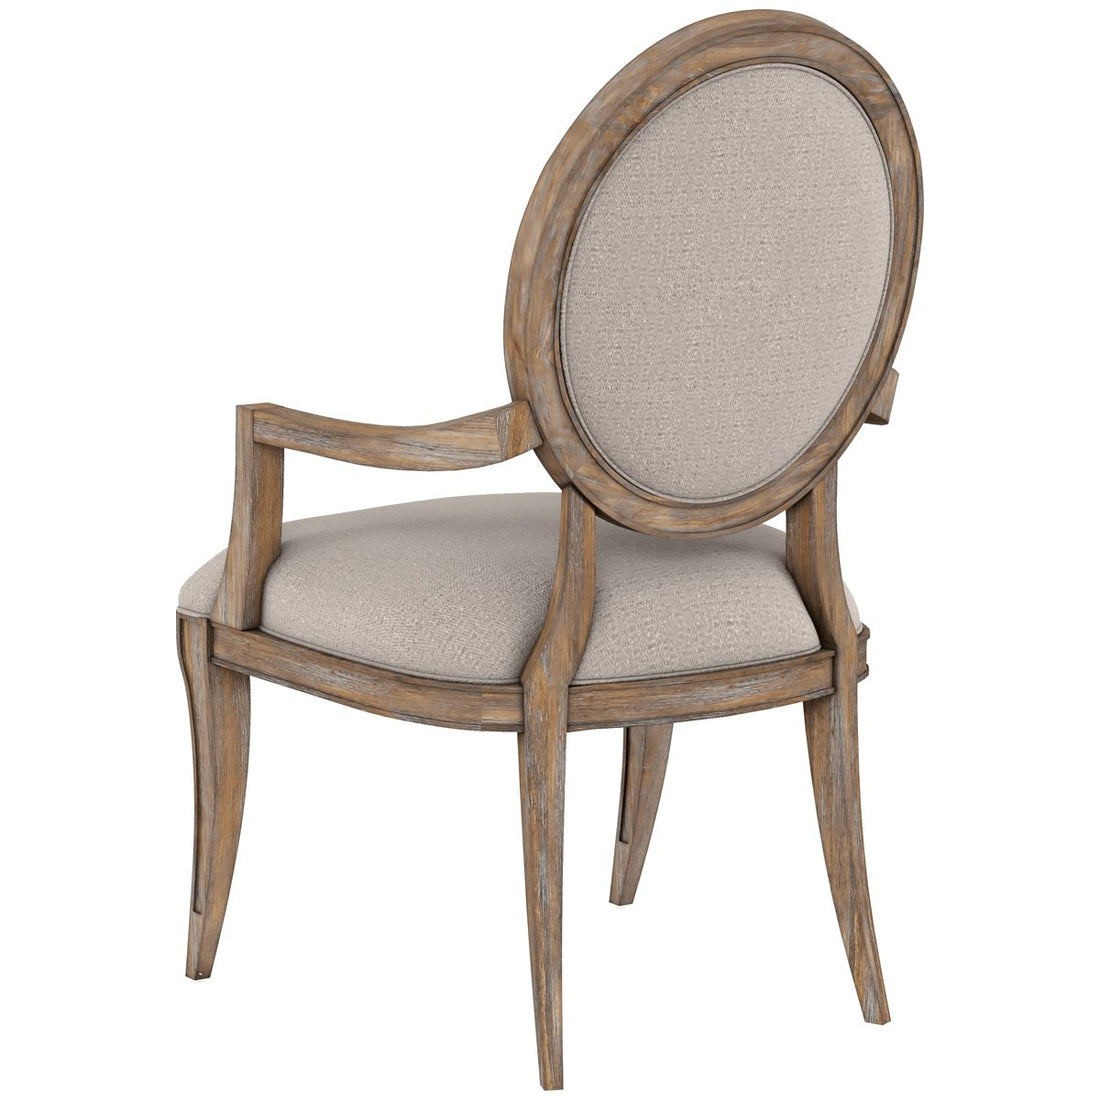 A.R.T. Furniture Architrave Oval Arm Chair, Set of 2